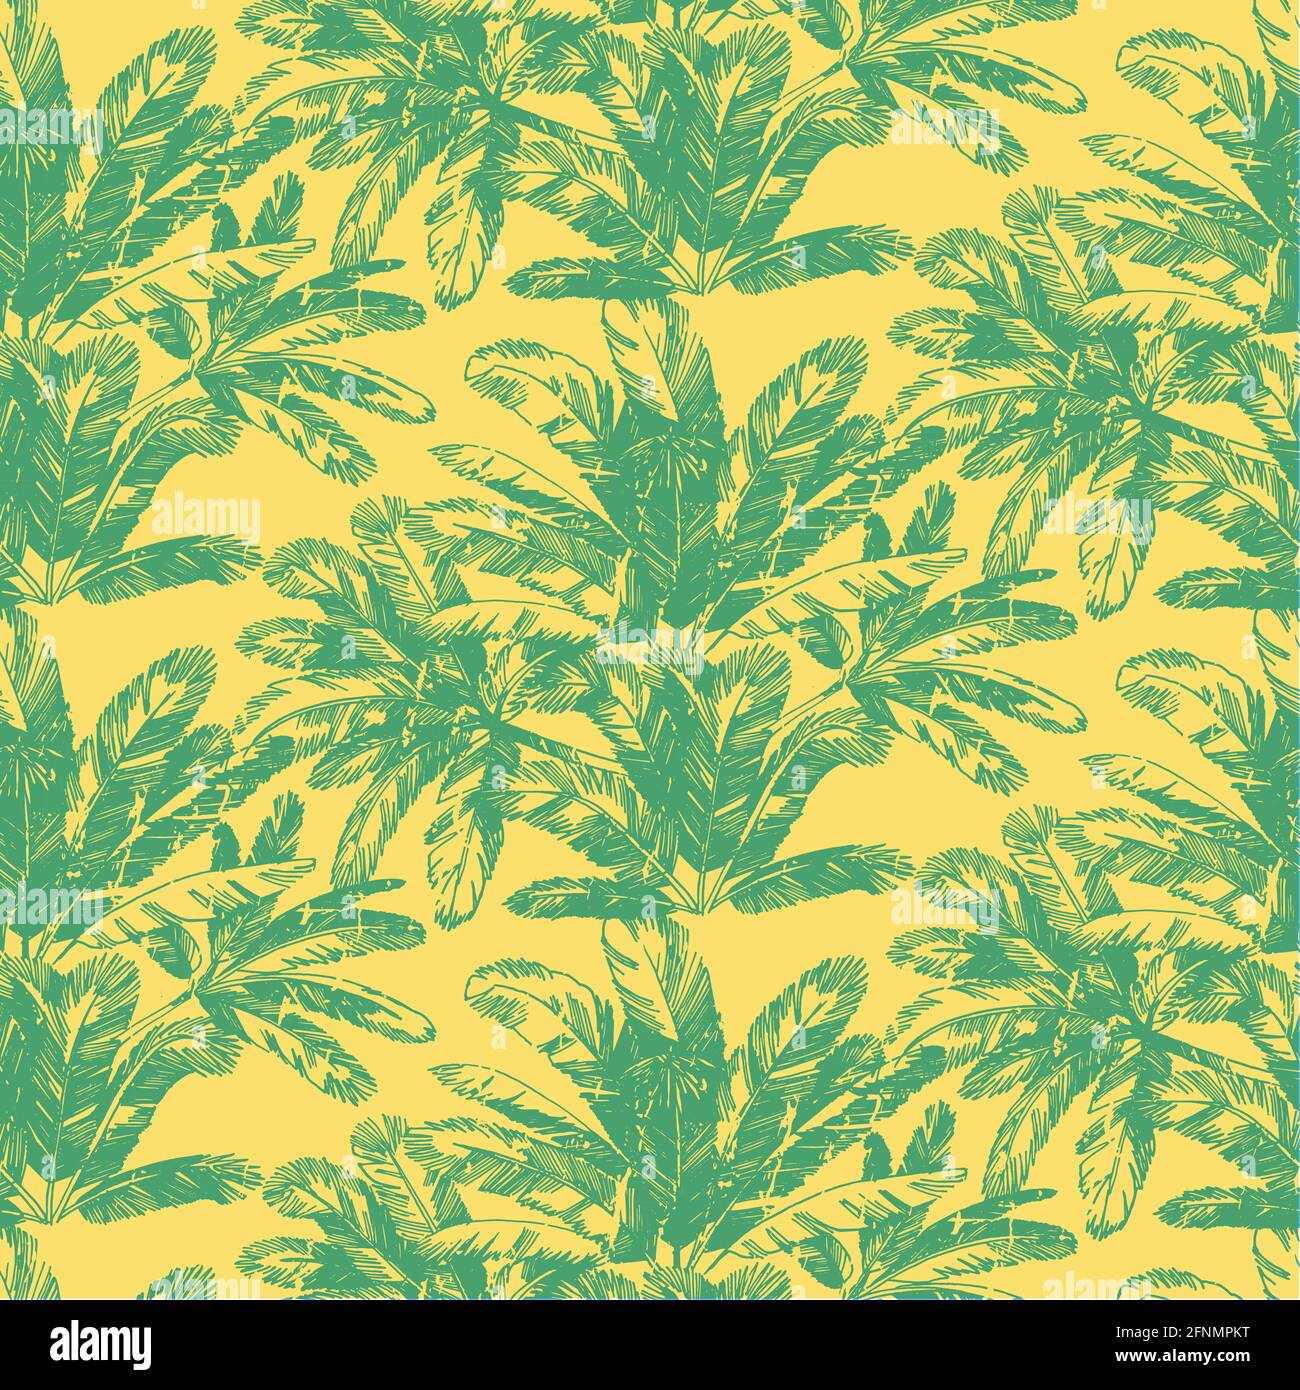 Green palm tree leaves on yellow background seamless pattern Stock ...